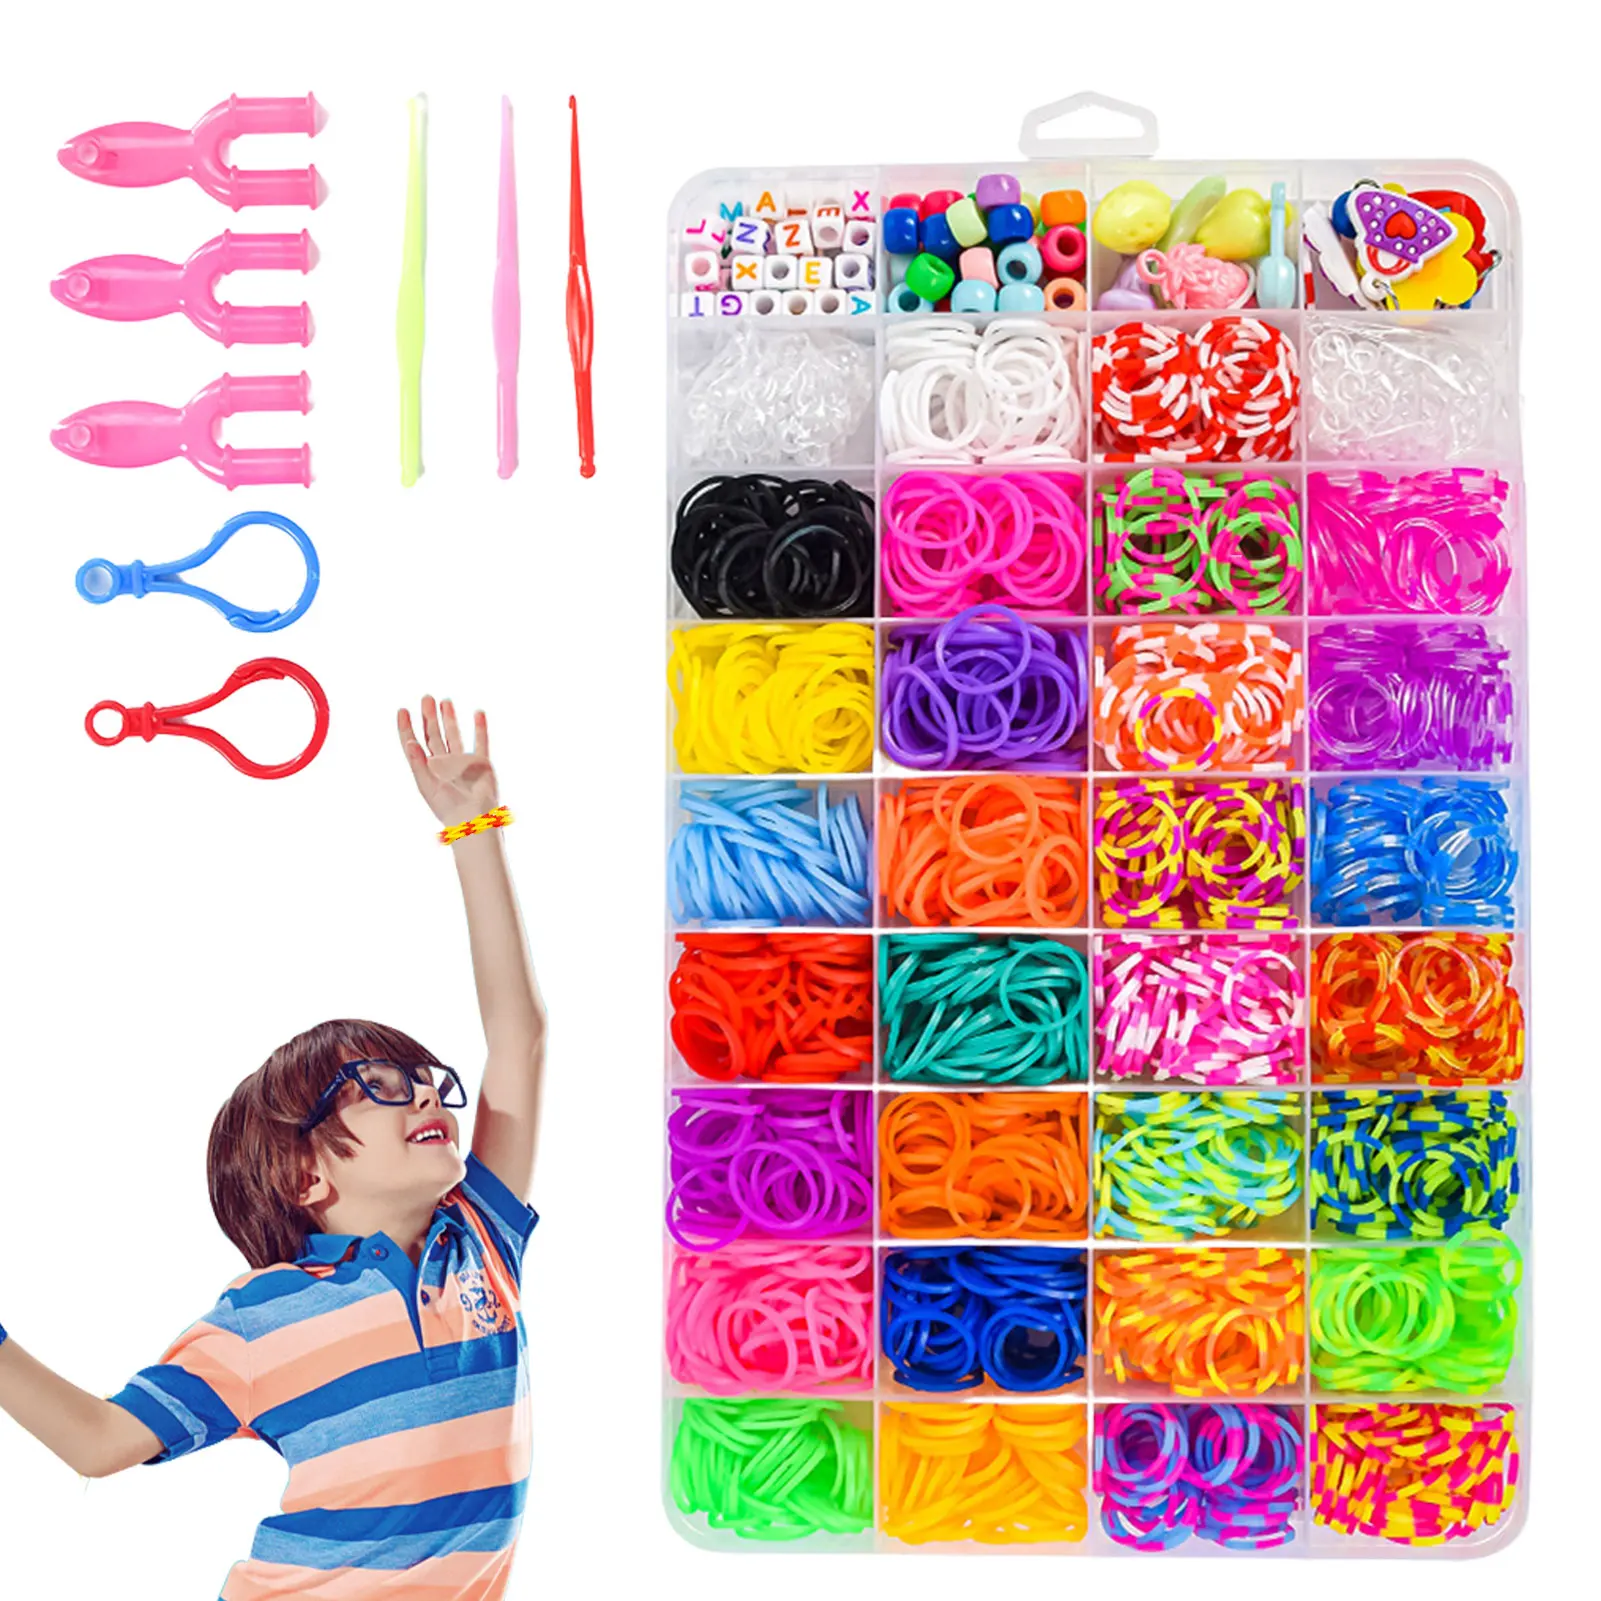 

Loom Band Refill Kit 1400 Rubber Loom Band Refill Set 1400 Colorful Loom Band Kits With 30 Colors Loom Band Refill Gifts For